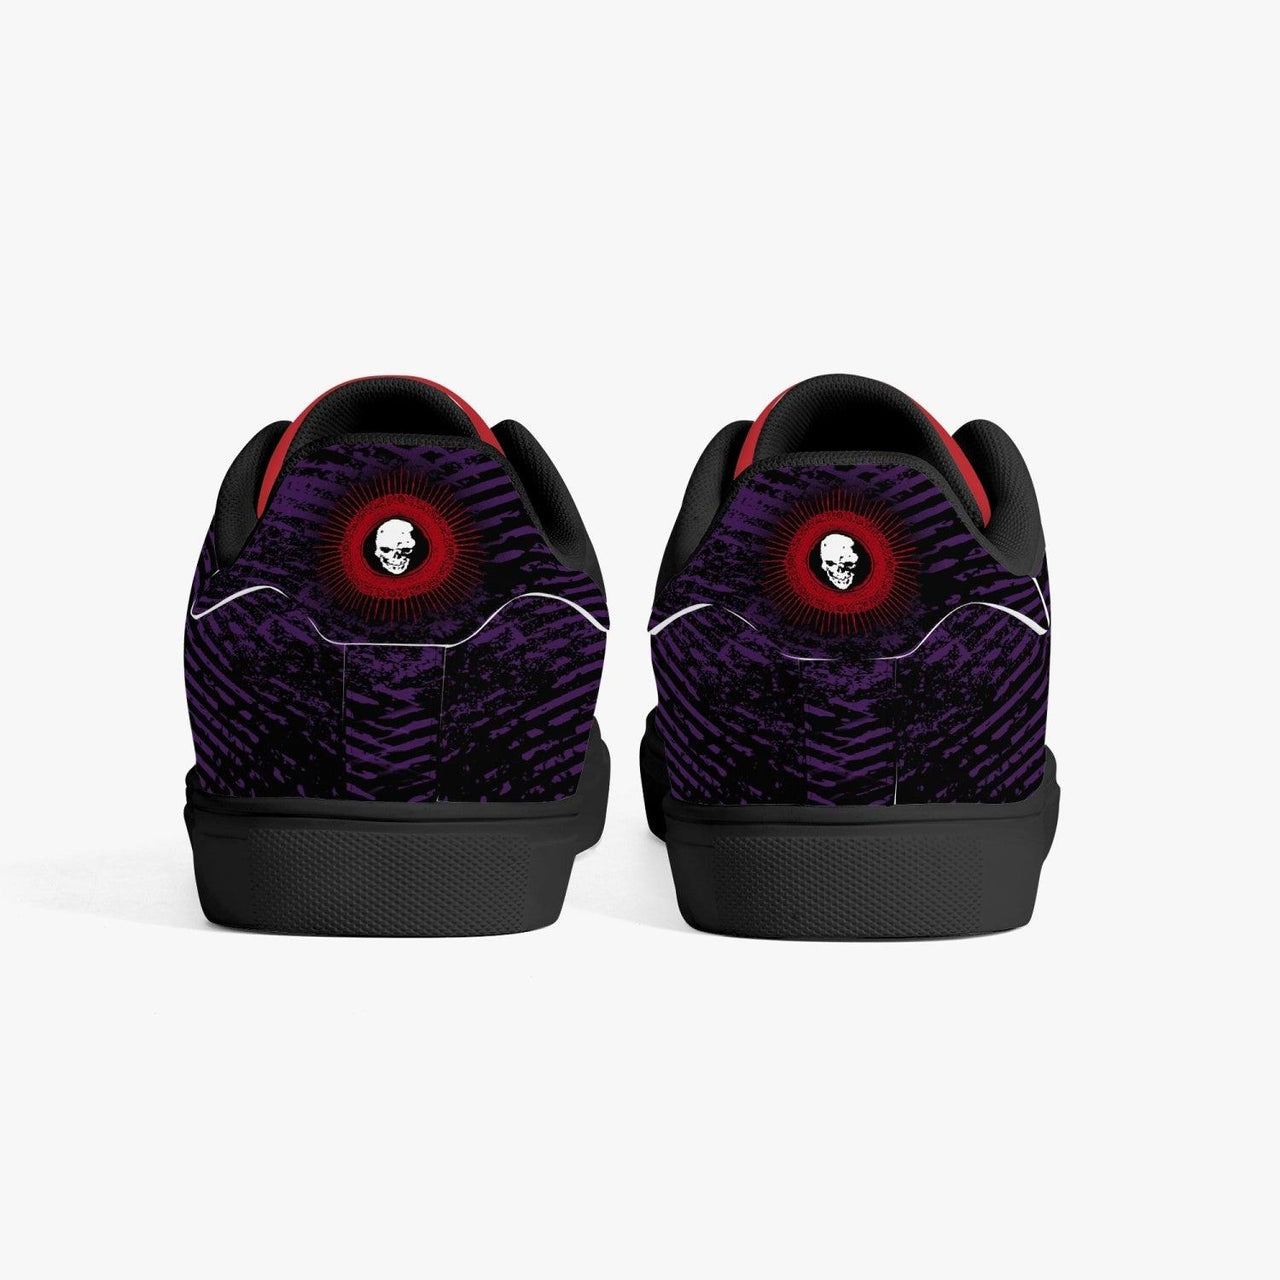 Death Note Ryuk Purple/Red Skate Anime Shoes _ Death Note _ Ayuko